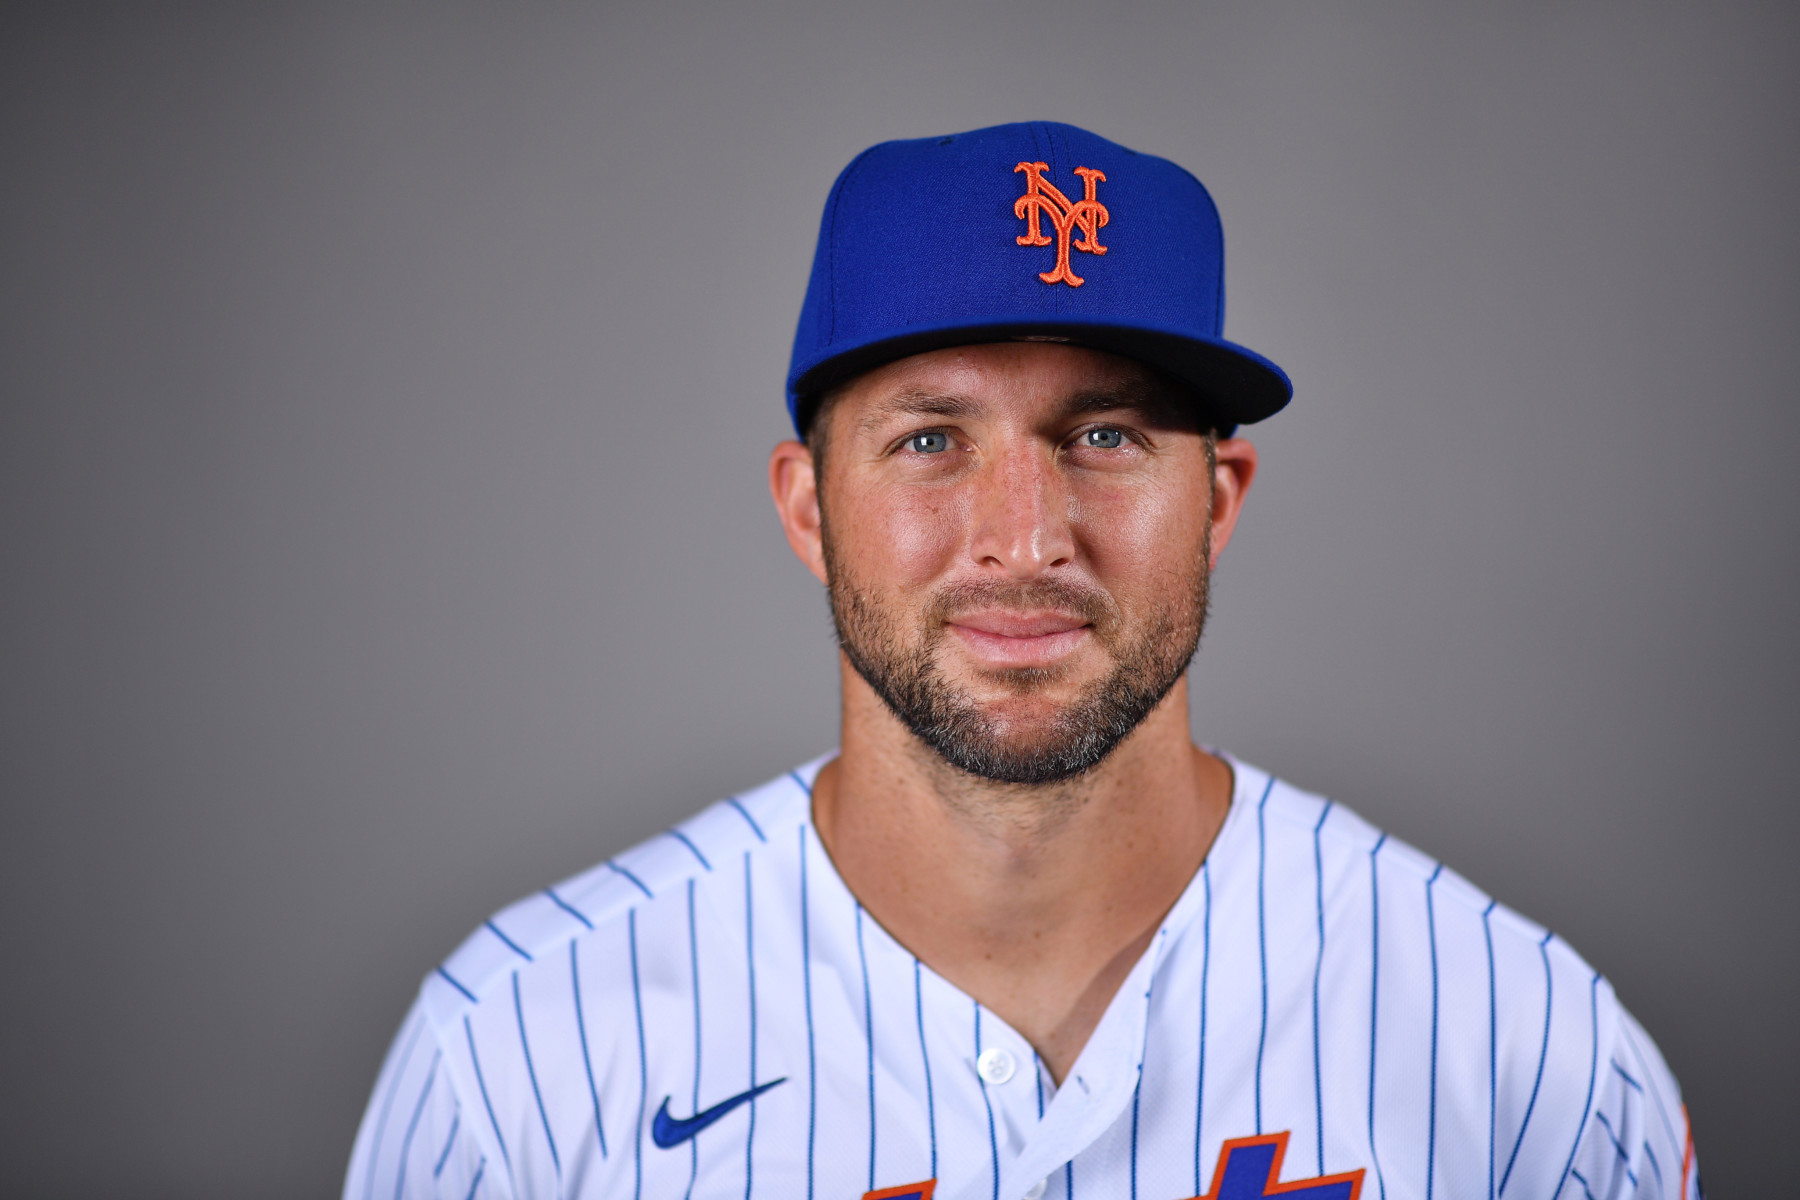 Tim is currently a baseball player for the New York Mets